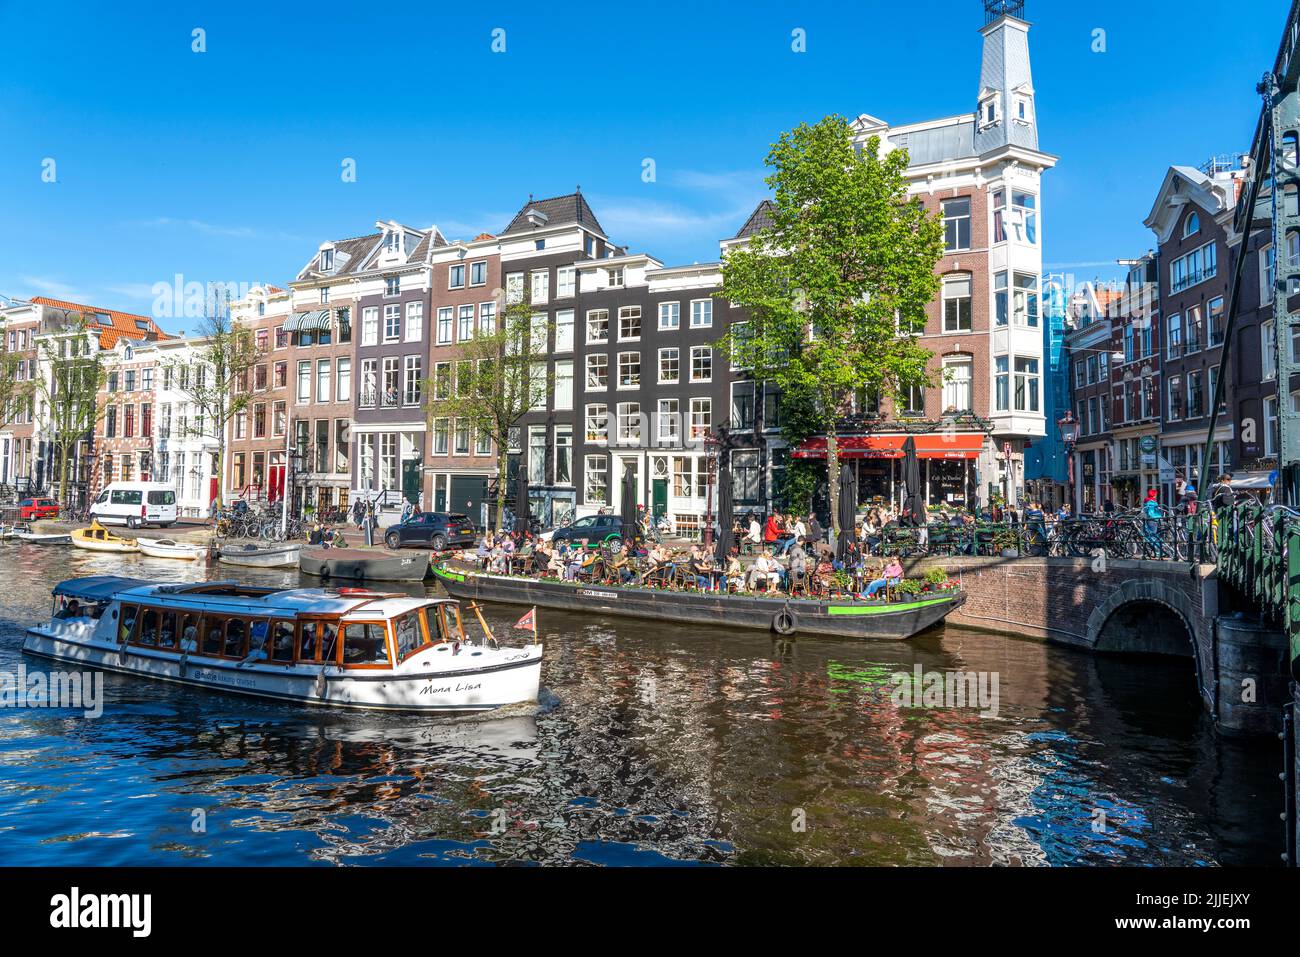 Houses on the Kloveniersburgwal canal, Old Town of Amsterdam, Canal Belt, Aluminiumbrug, Café with terrace on a pontoon boat, Amsterdam, Netherlands Stock Photo